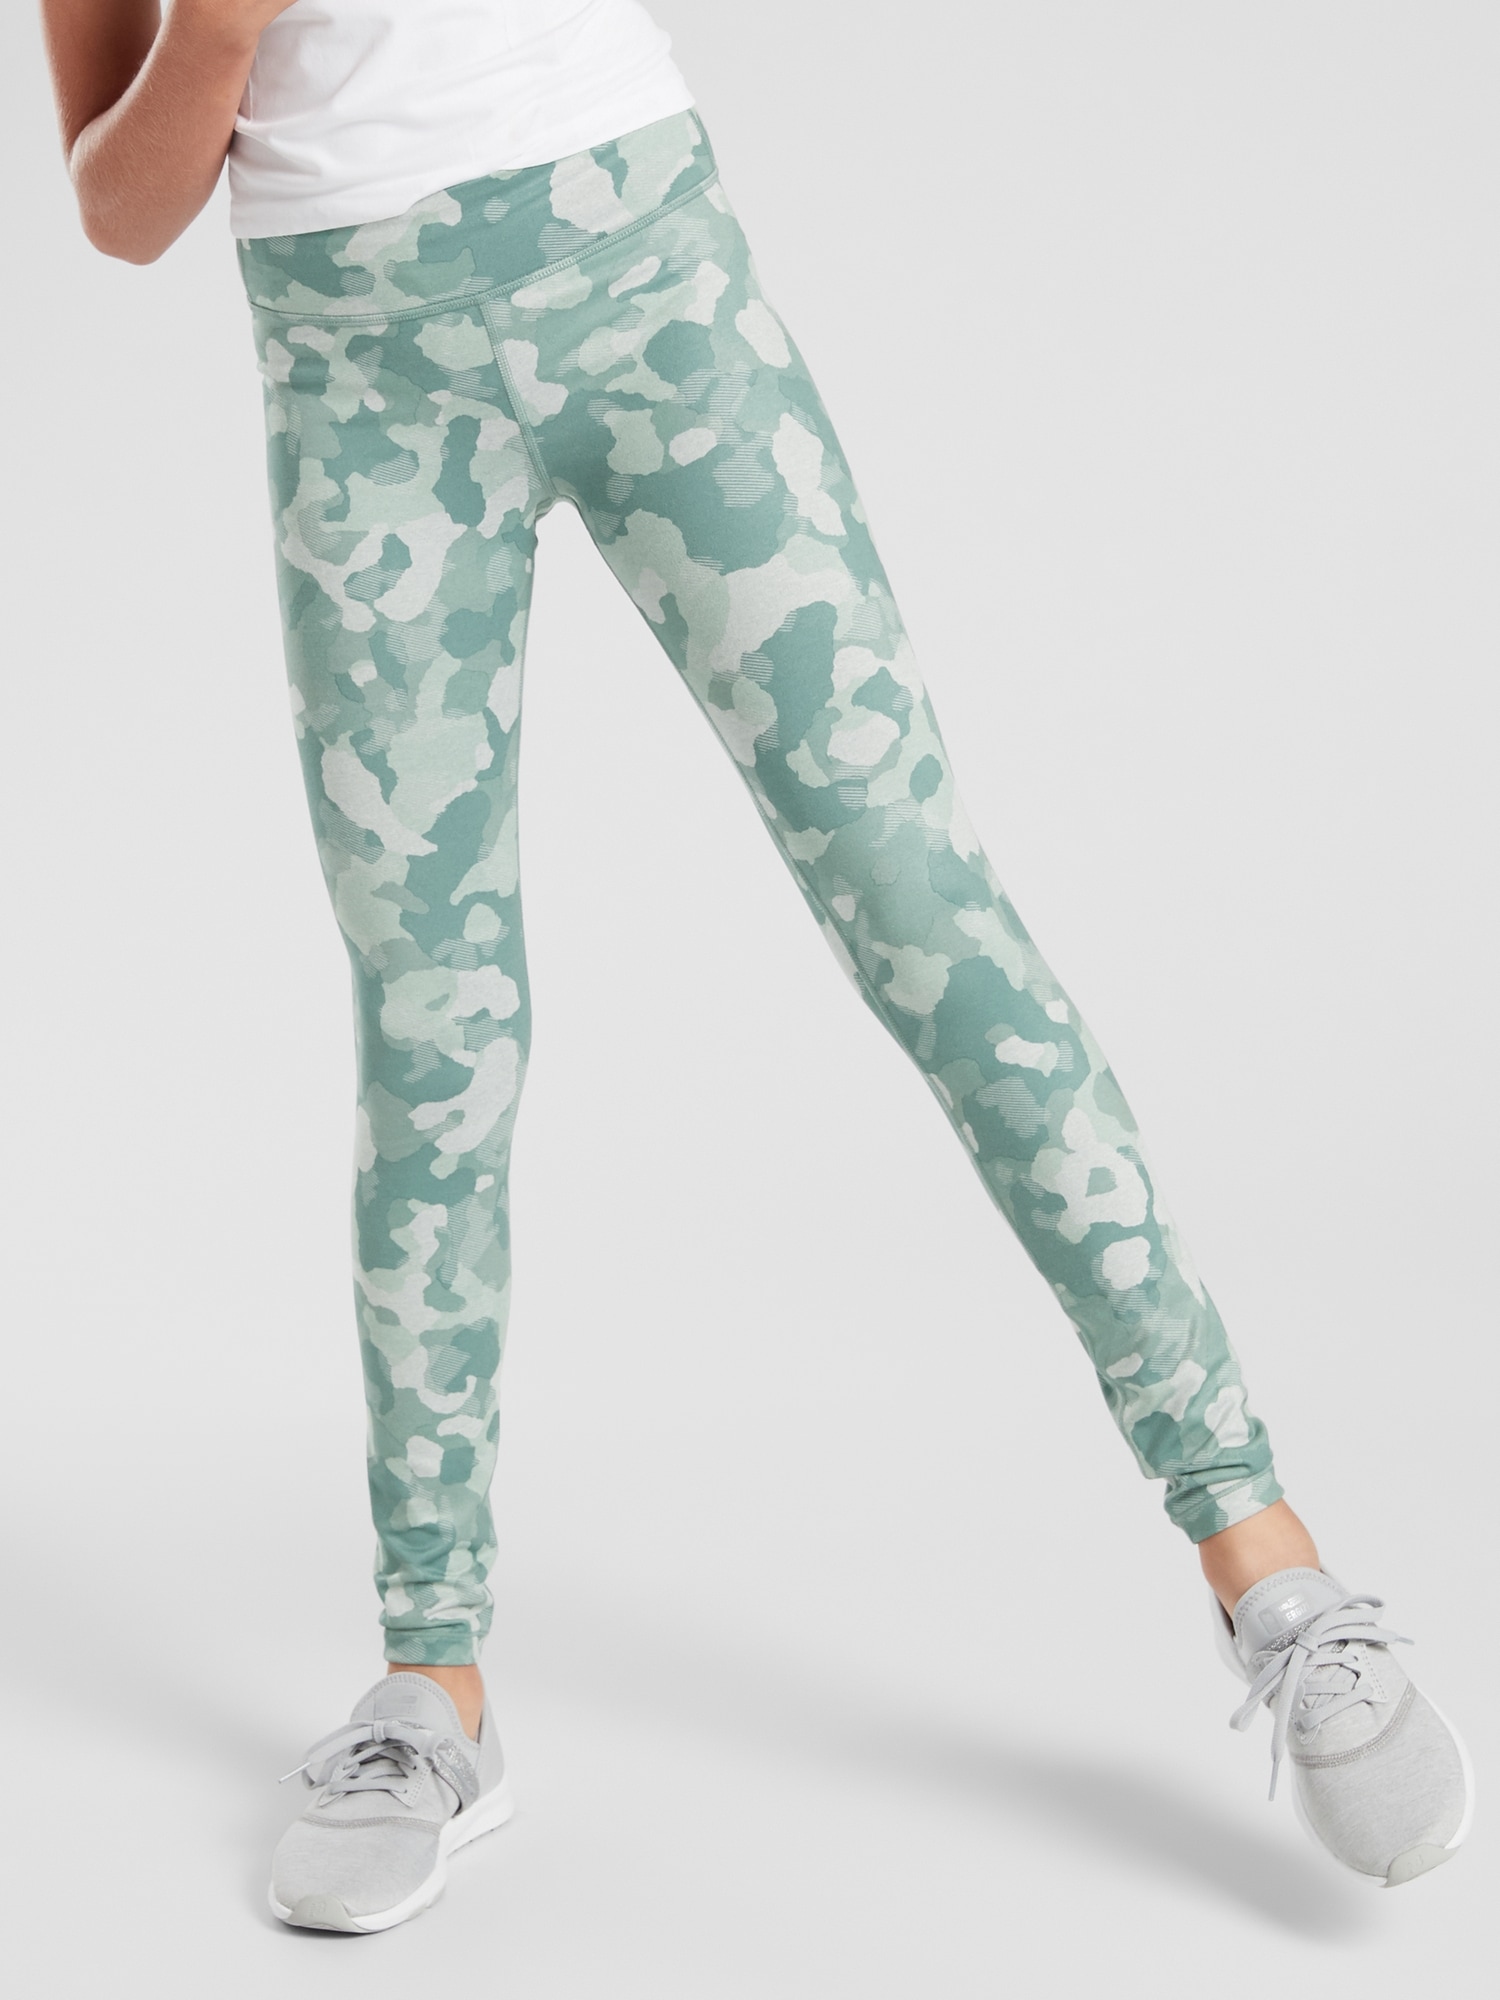 Printed Chit Chat Tight  Clothes design, Tights, Fashion